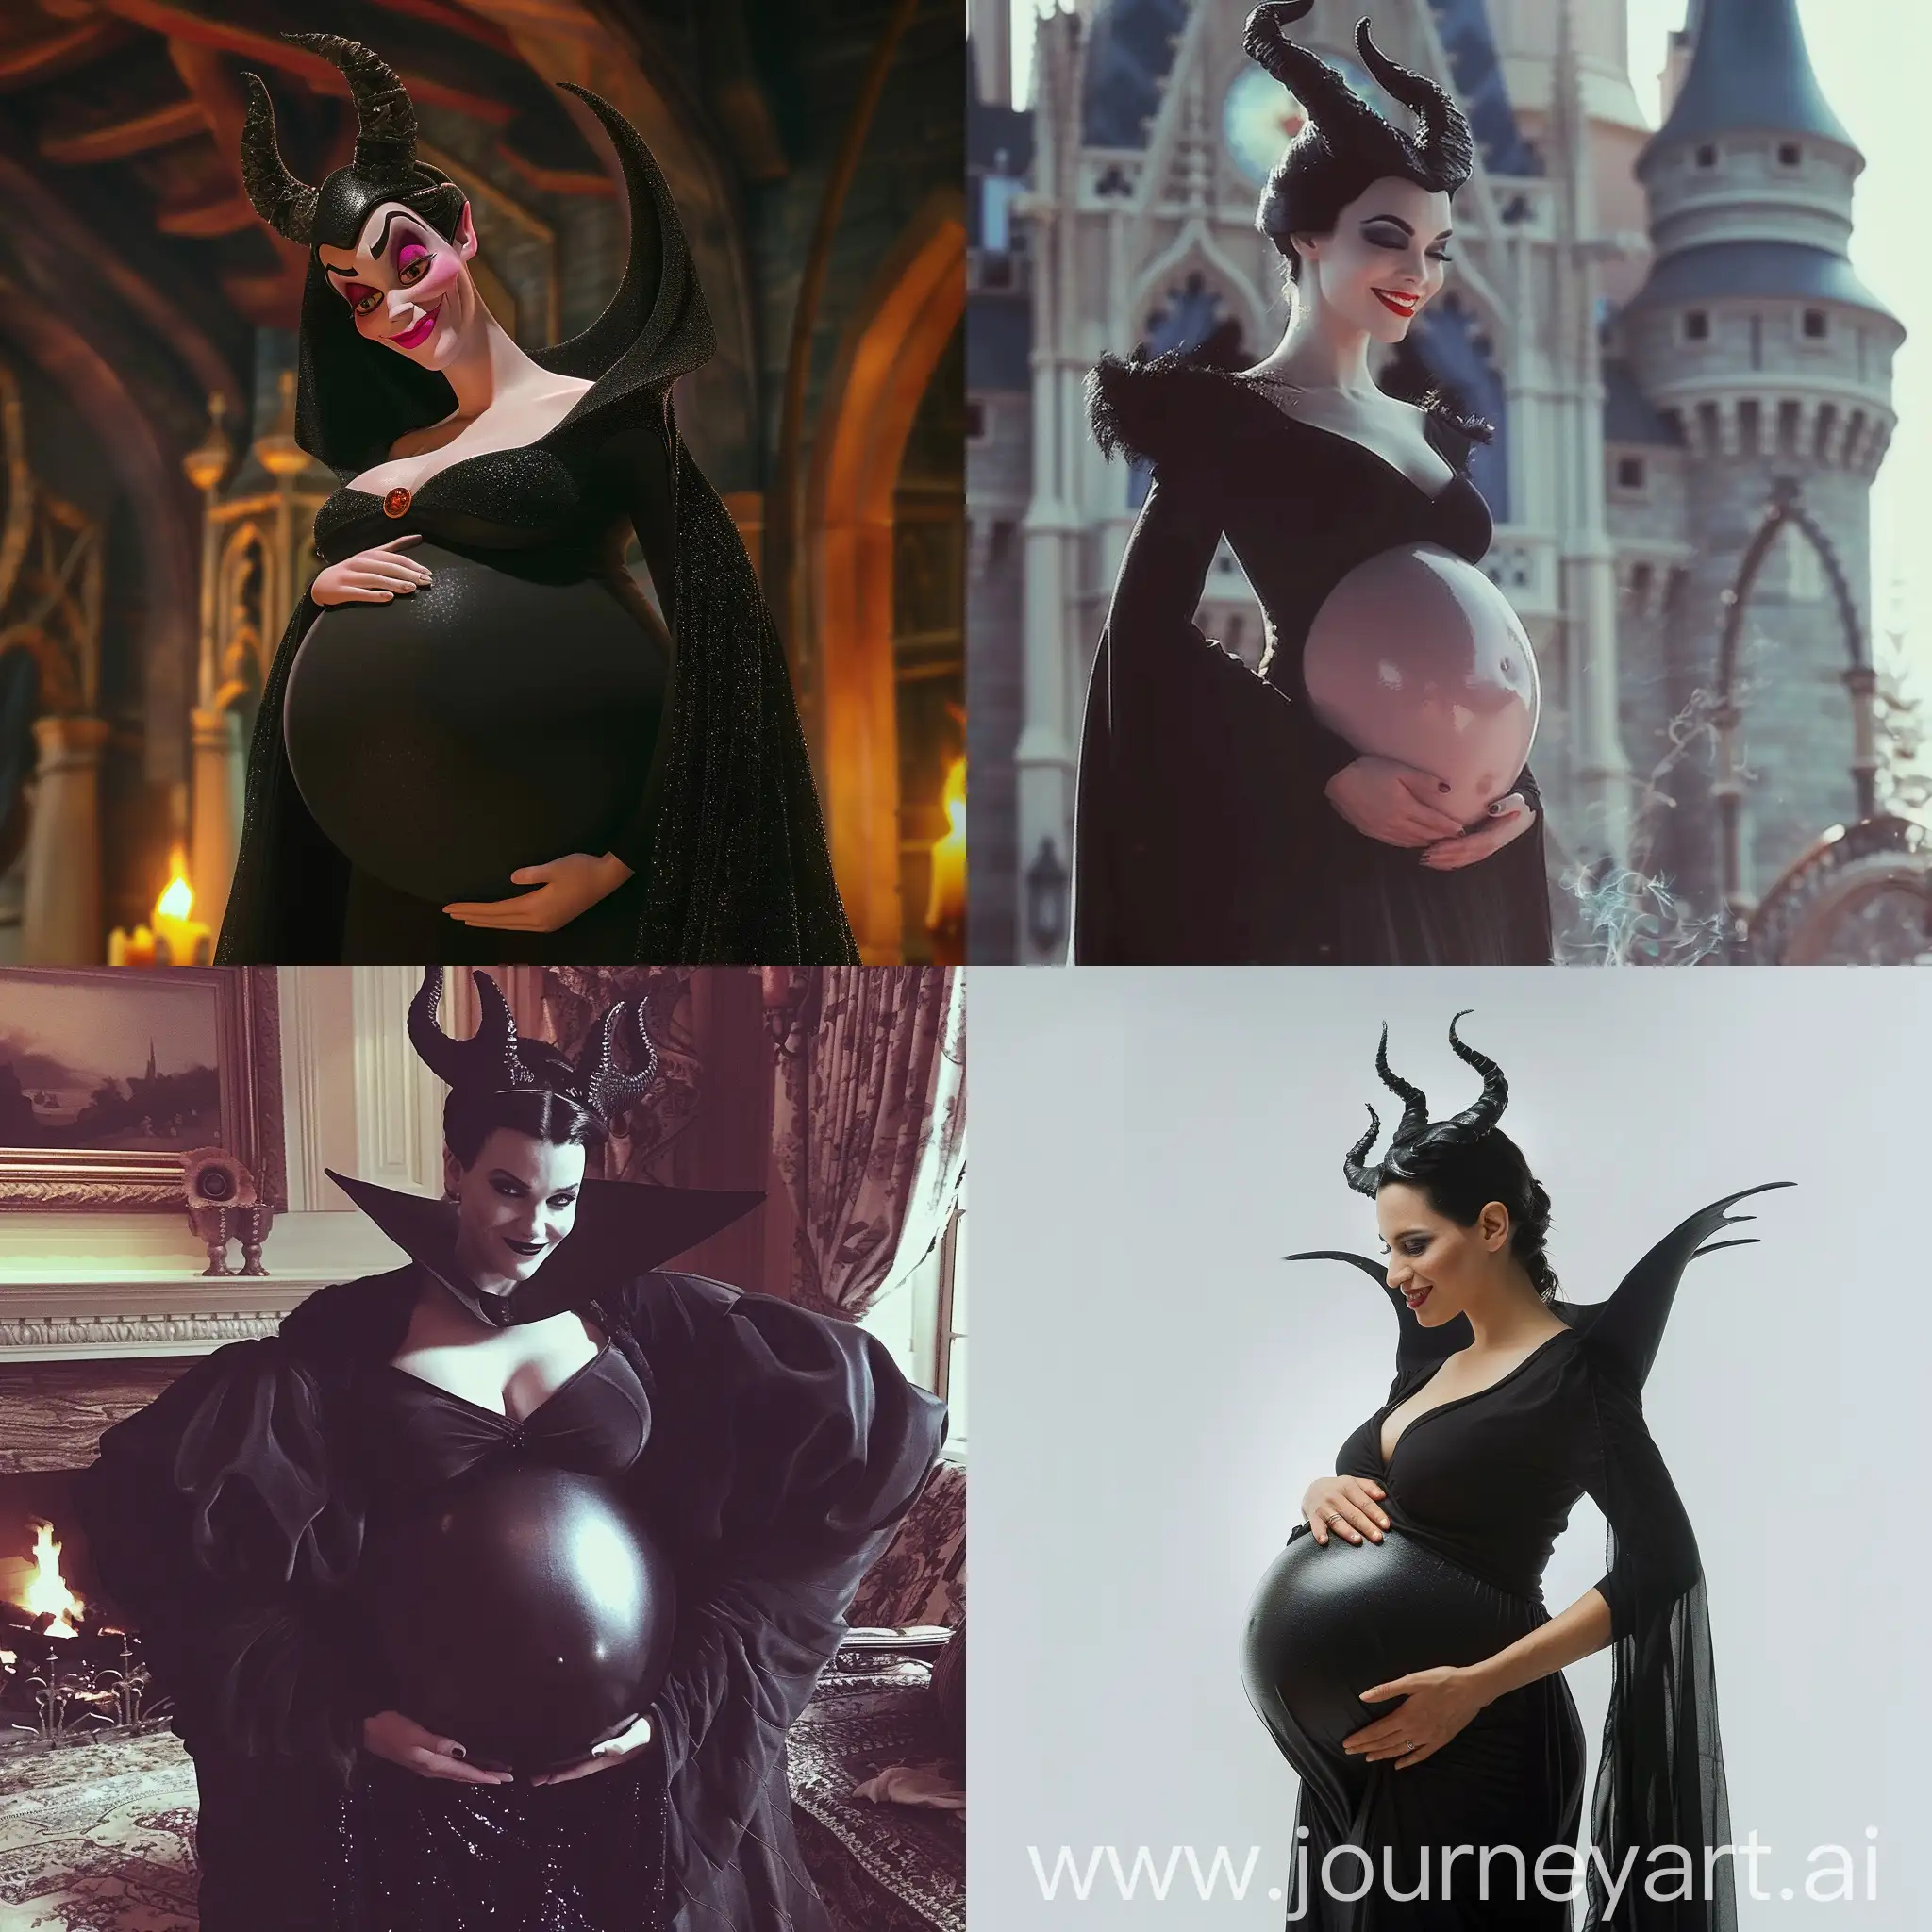 Maleficent, Pregnant, Her pregnant belly is quite large, Bare Belly